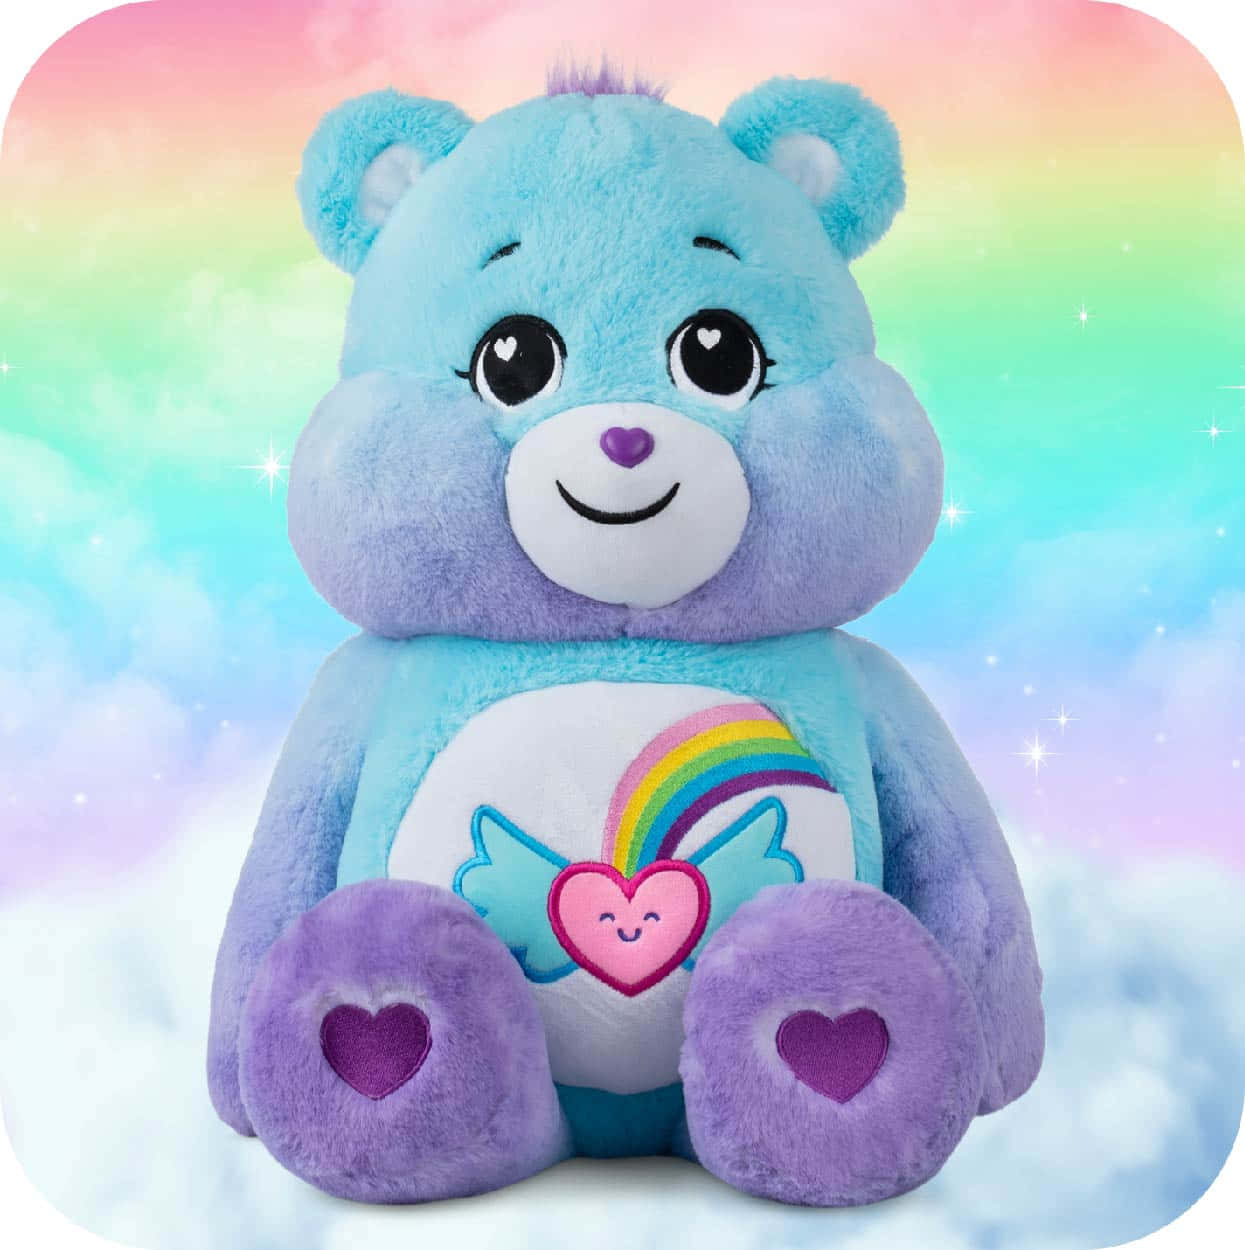 Get ready for a Beary Good Day with the Care Bears